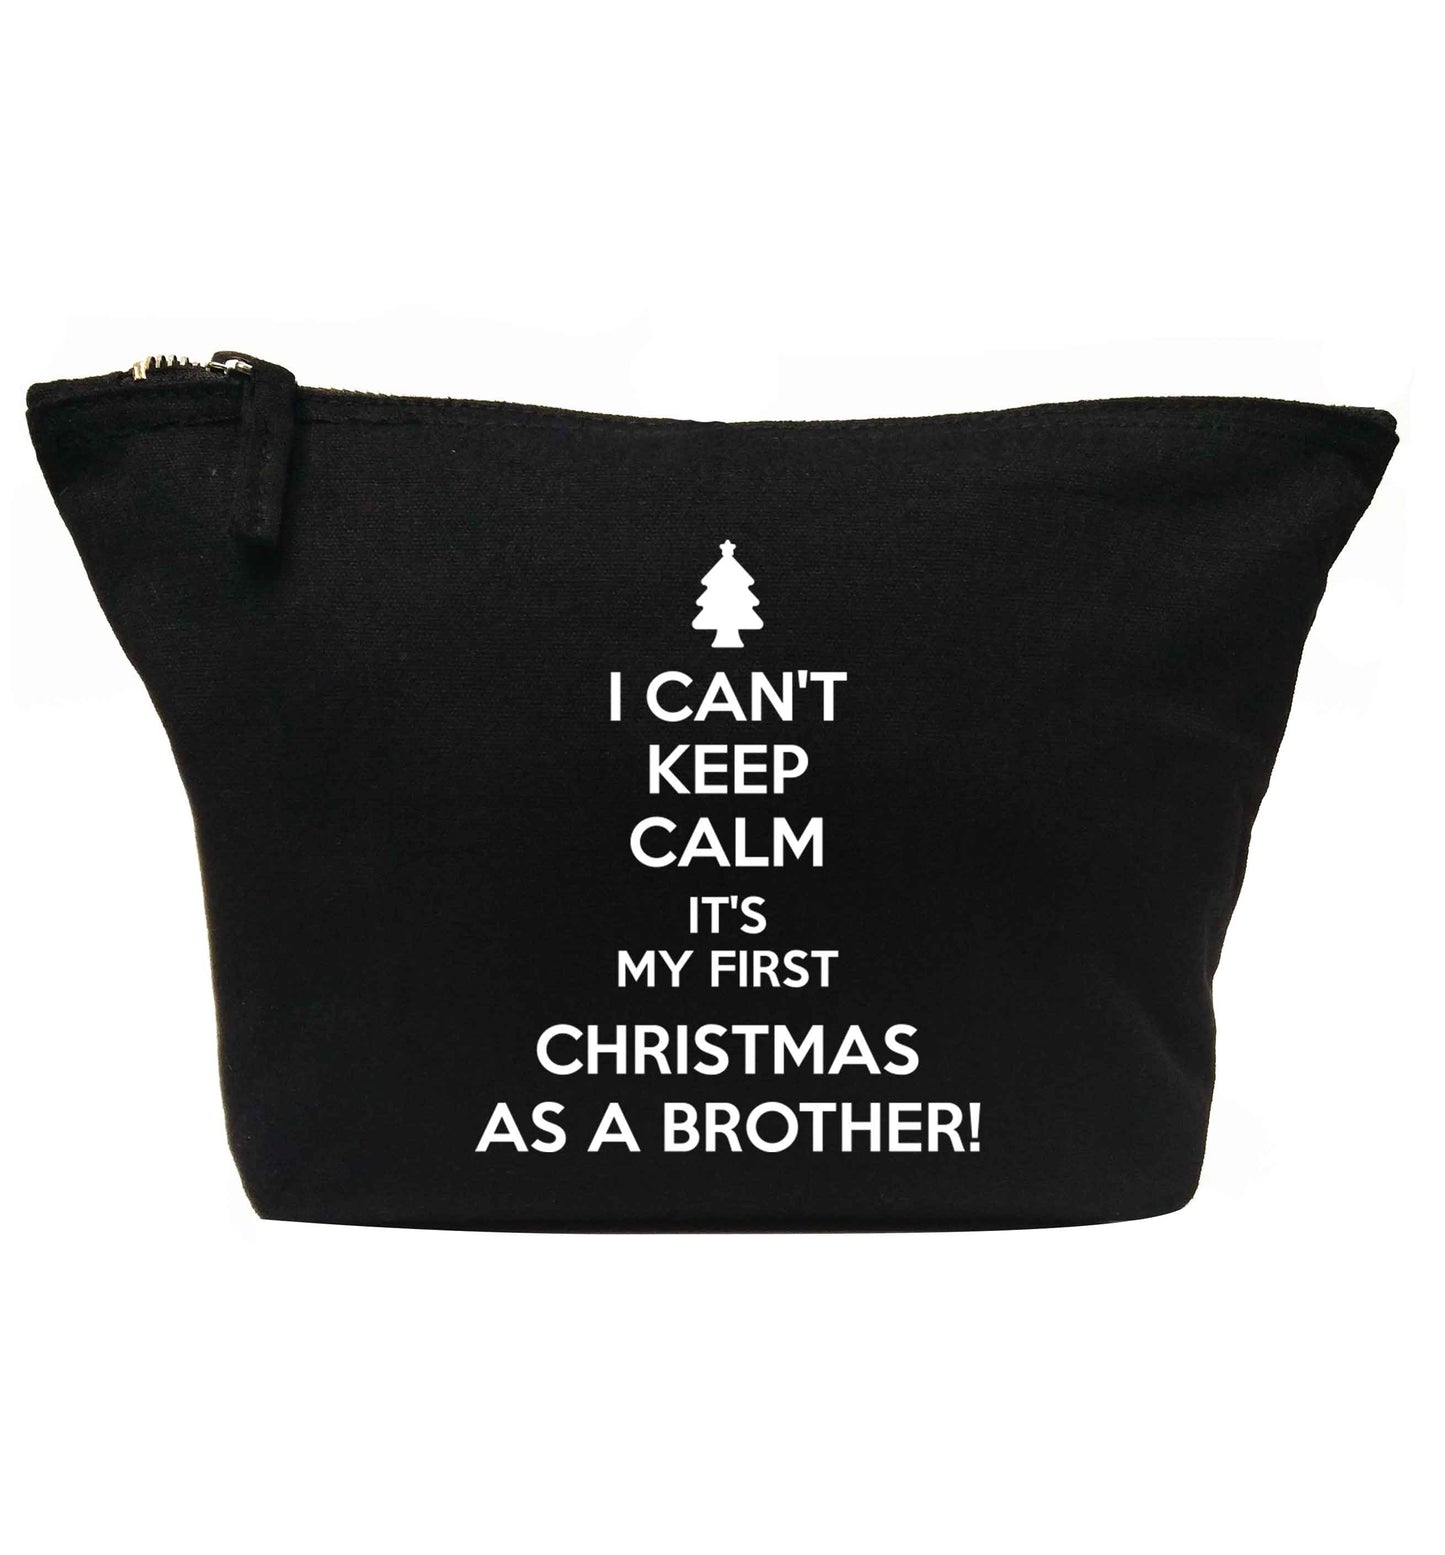 I can't keep calm it's my first Christmas as a brother! | makeup / wash bag